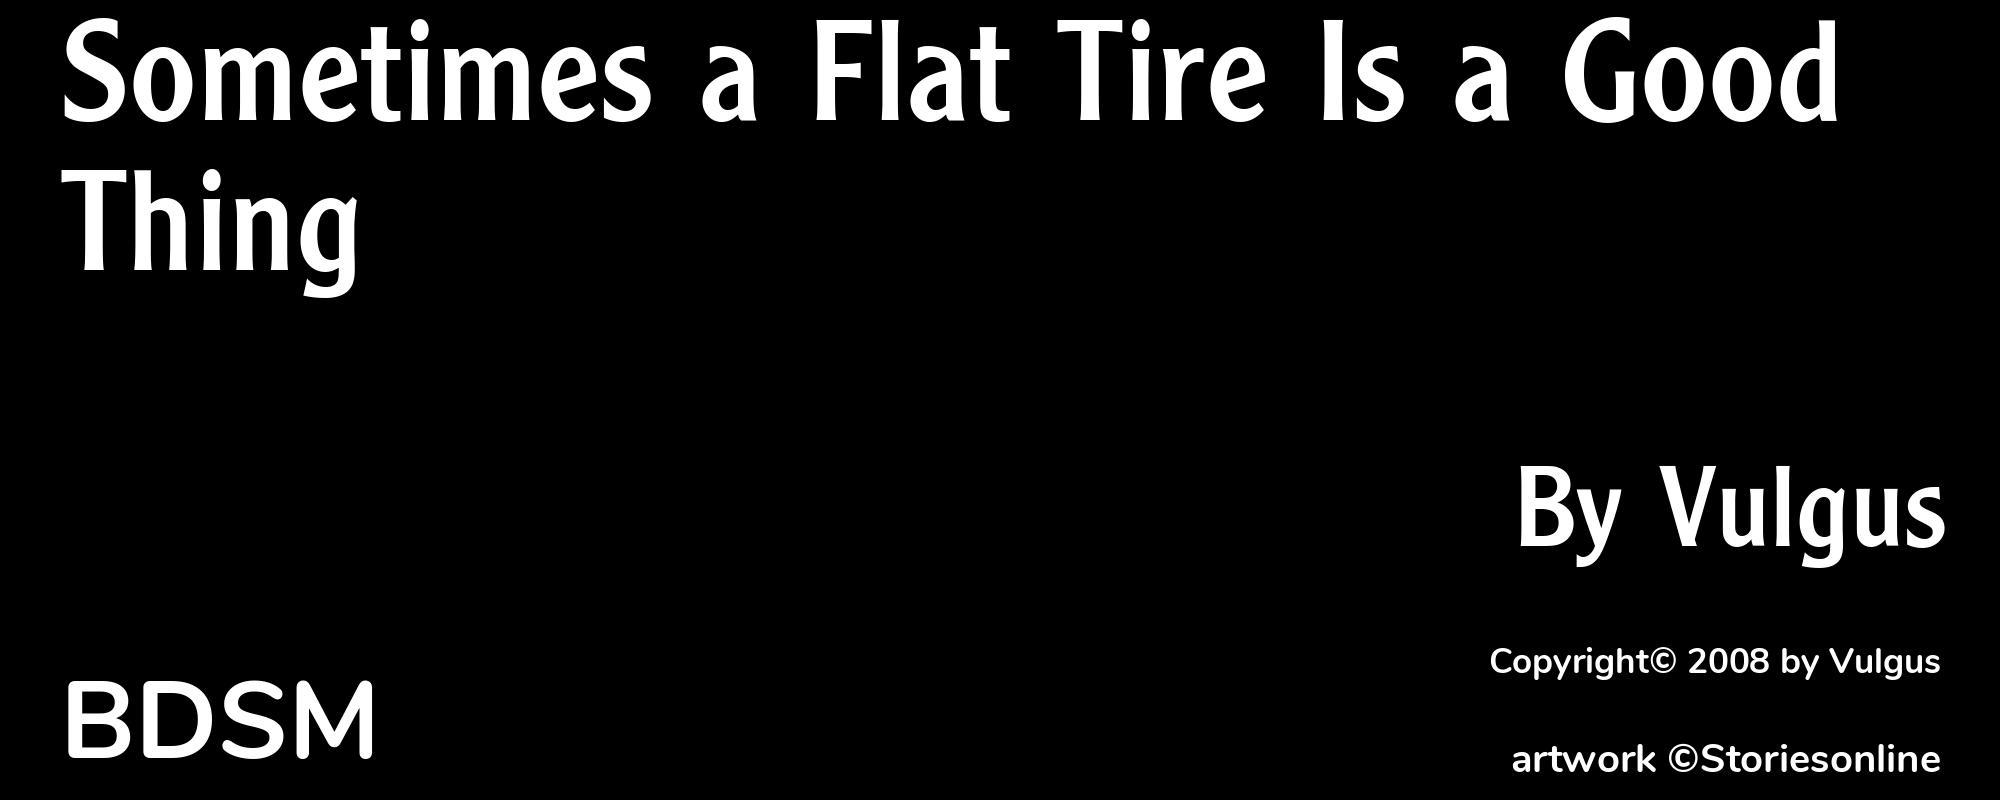 Sometimes a Flat Tire Is a Good Thing - Cover